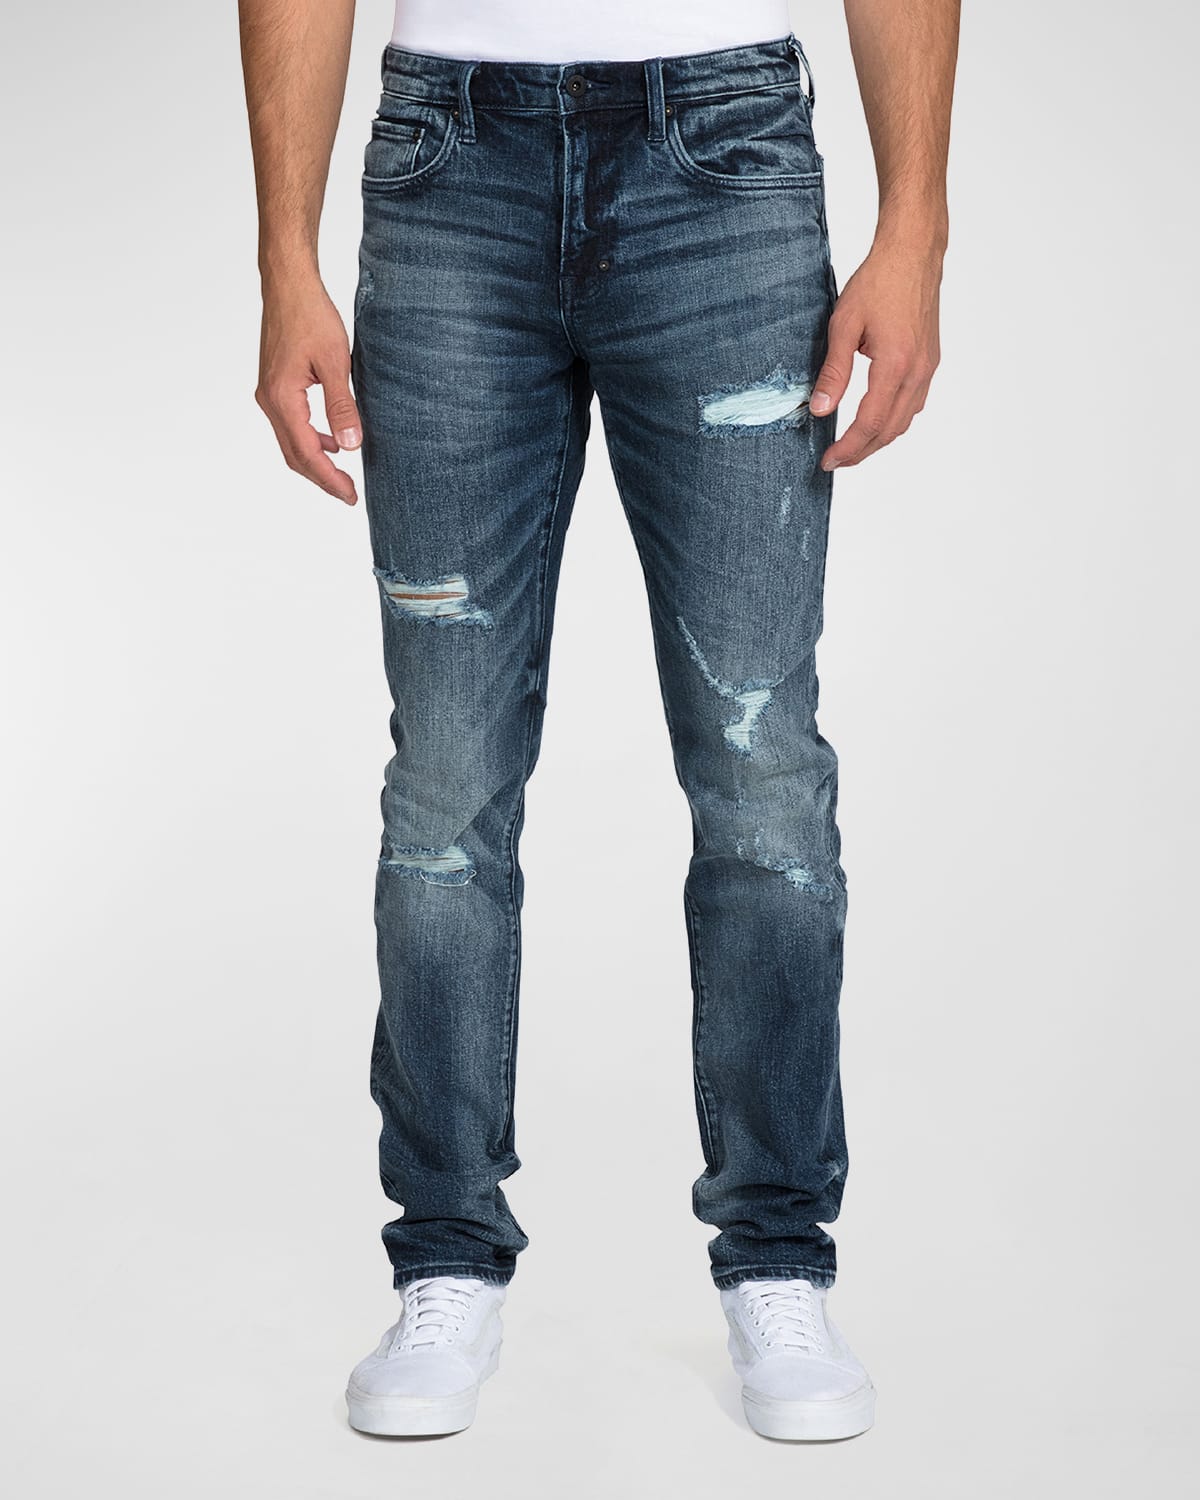 Men's The One Distressed Jeans